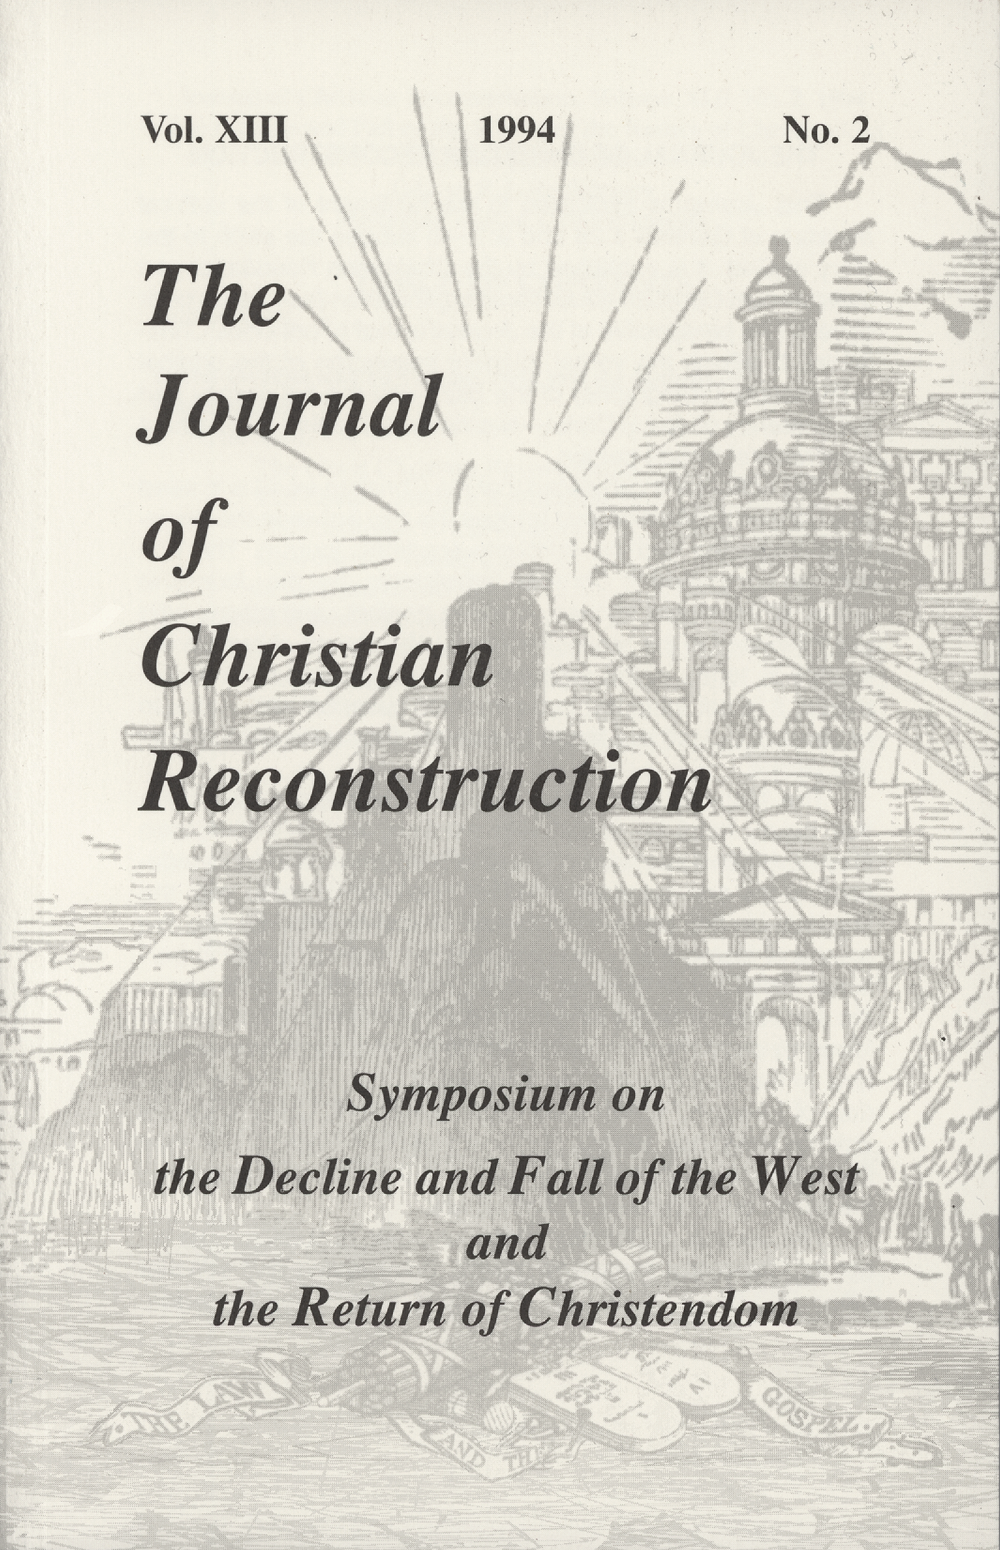 JCR Vol 13 No 2: Symposium on the Decline and Fall of the West and the Return of Christendom